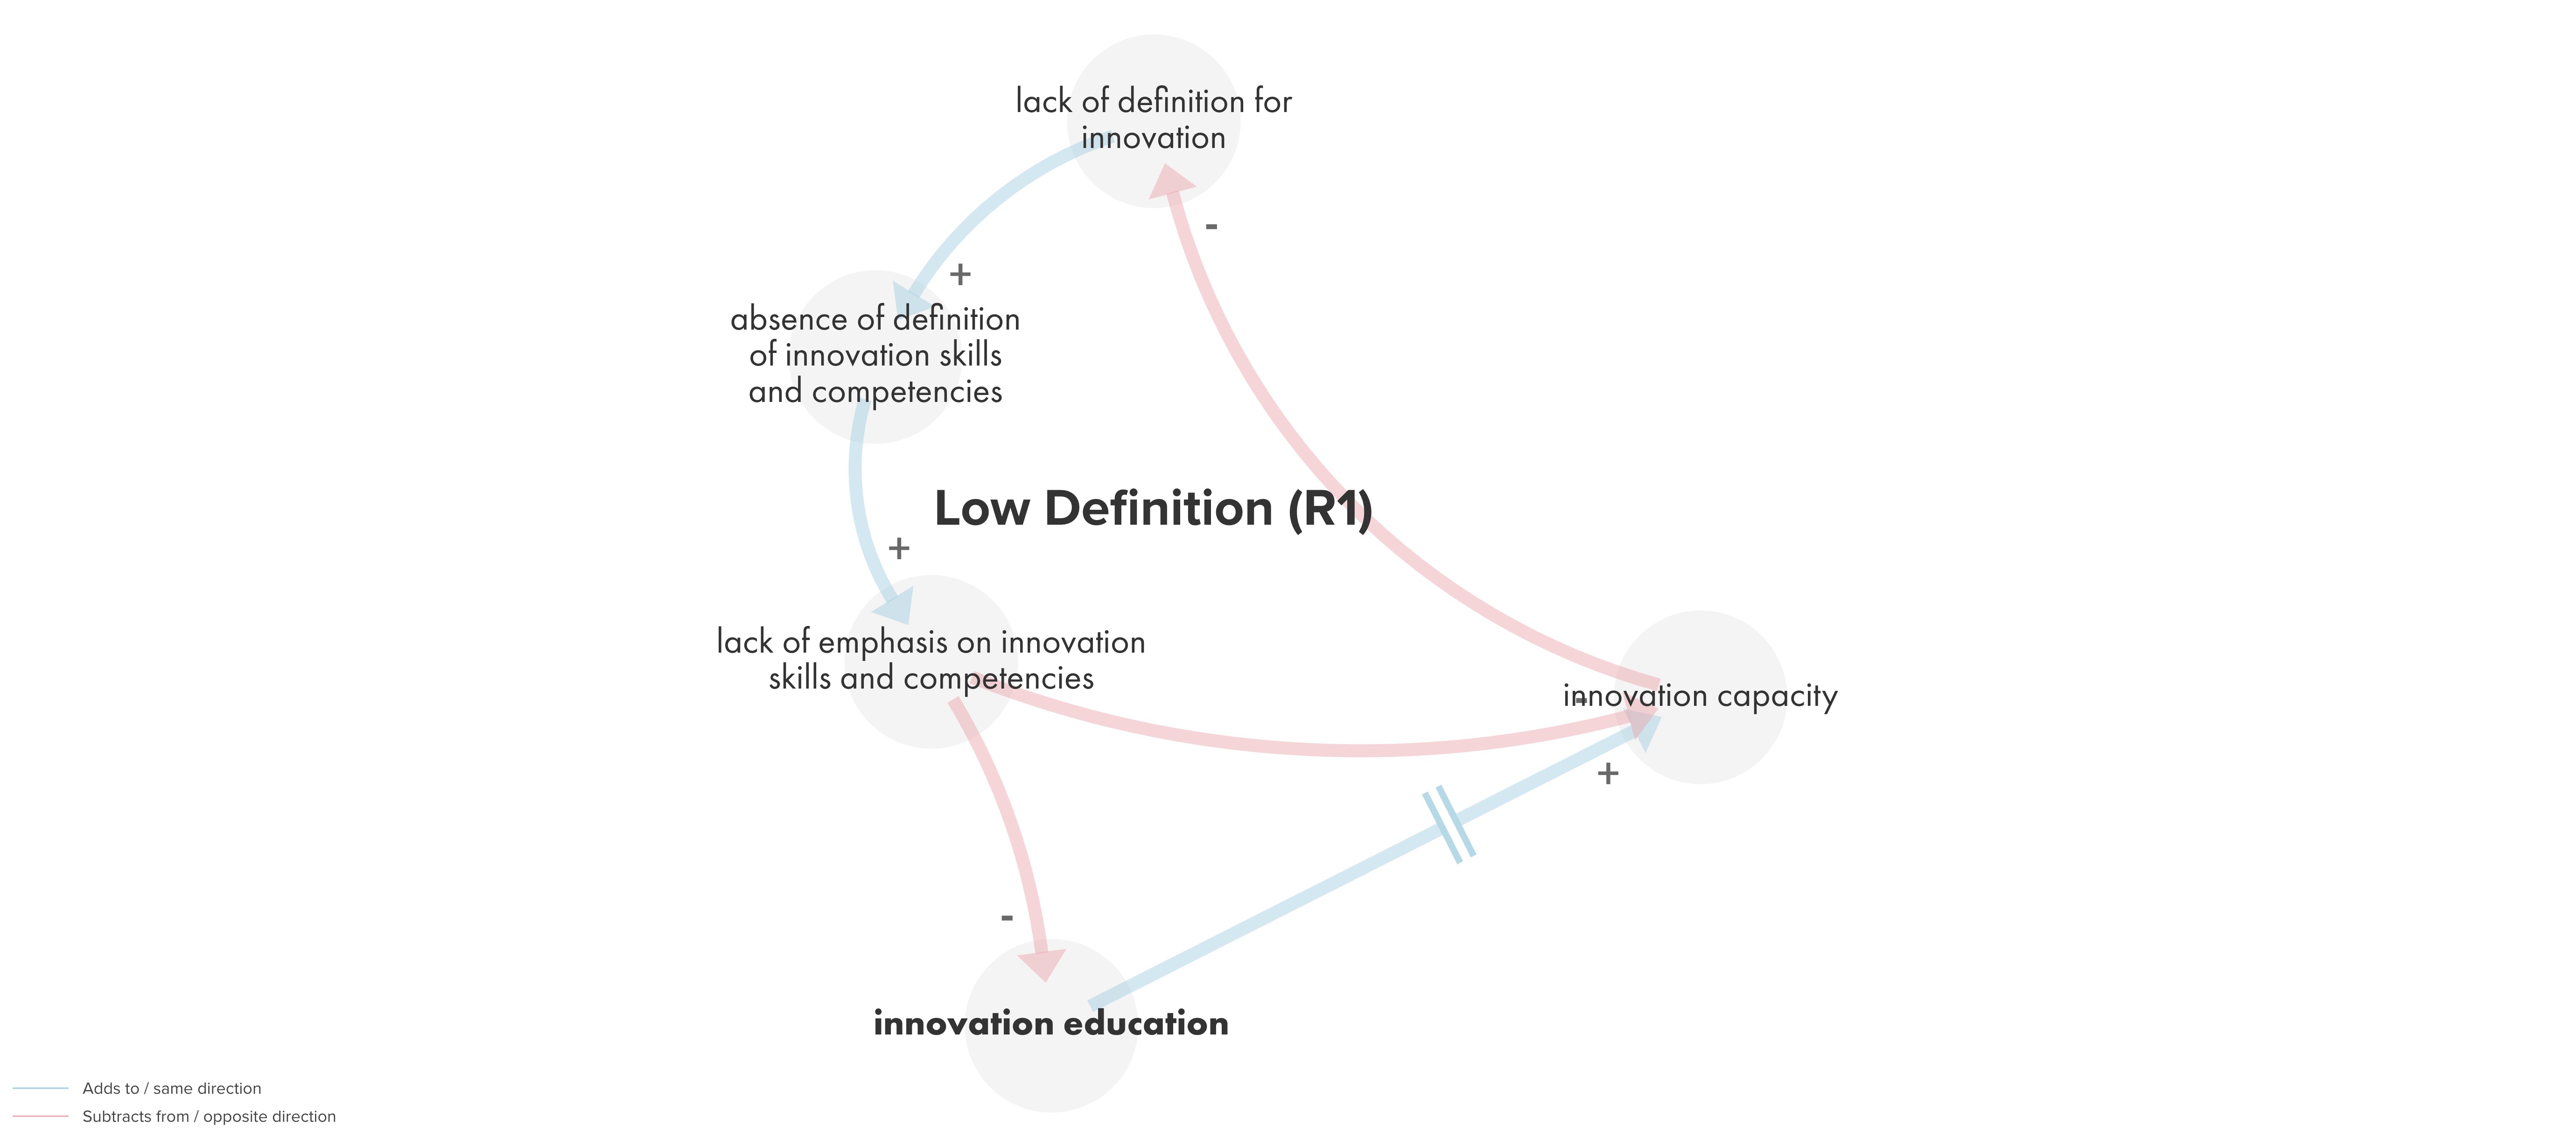 The Low Definition loop